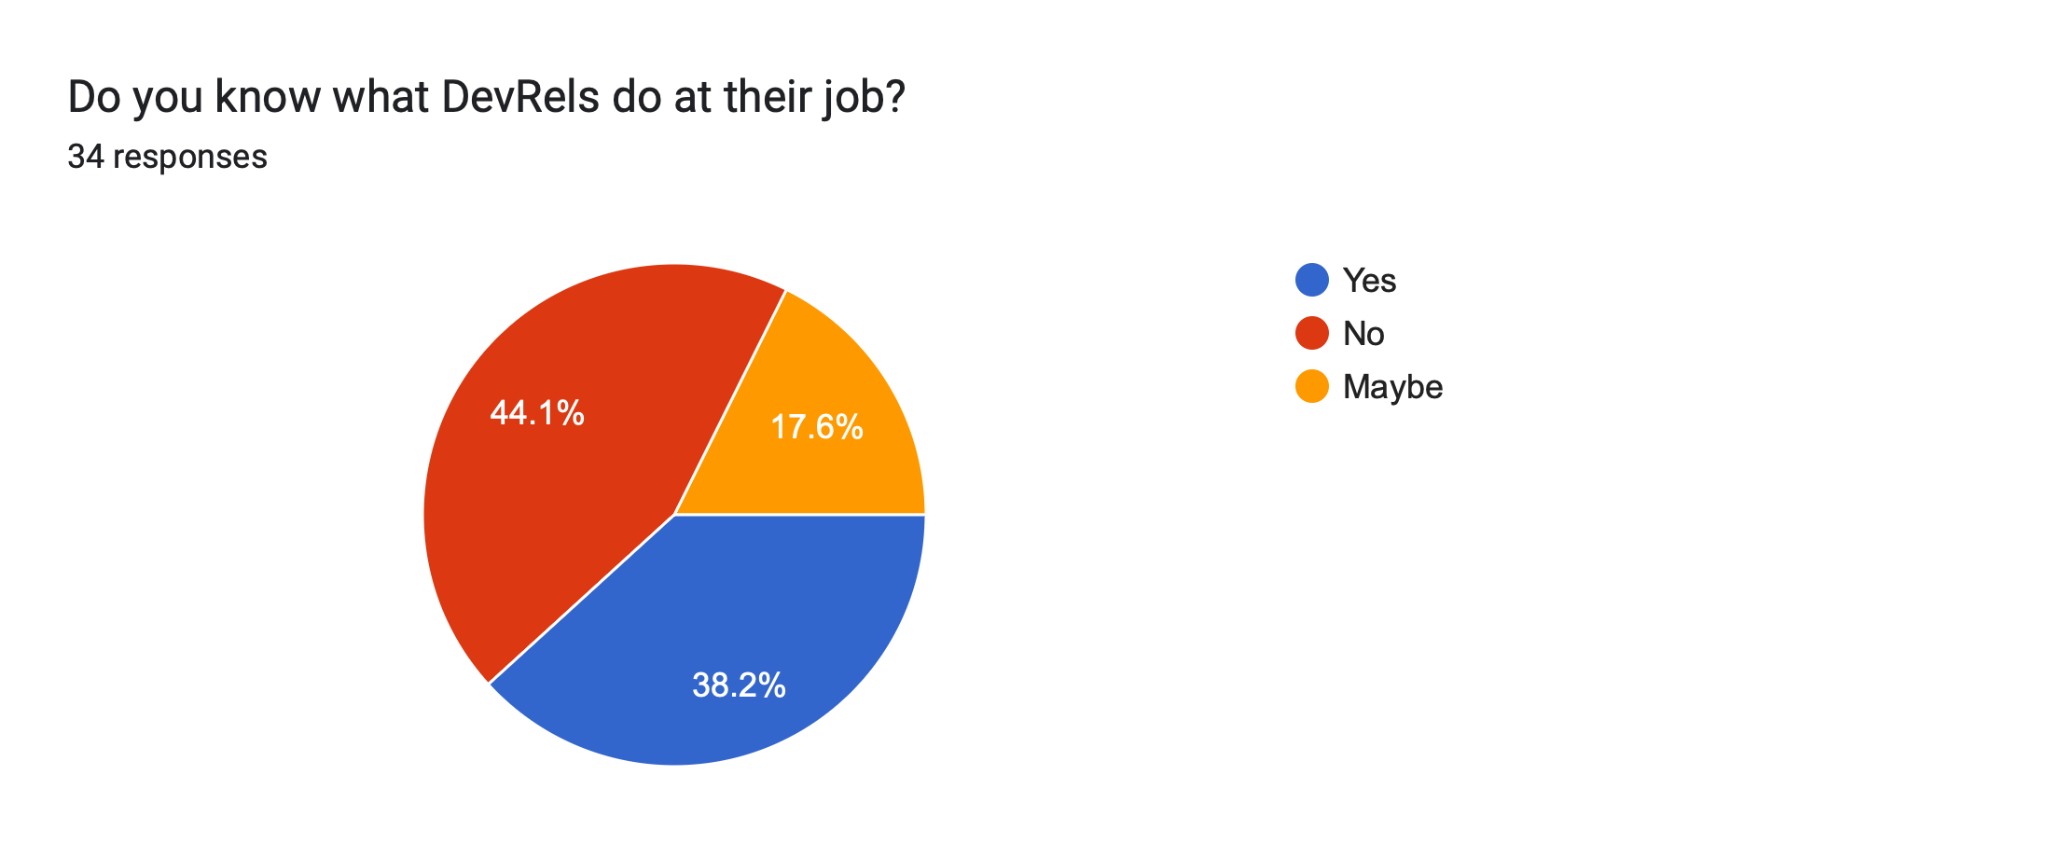 Forms response chart. Question title: Do you know what DevRels do at their job?. Number of responses: 34 responses.